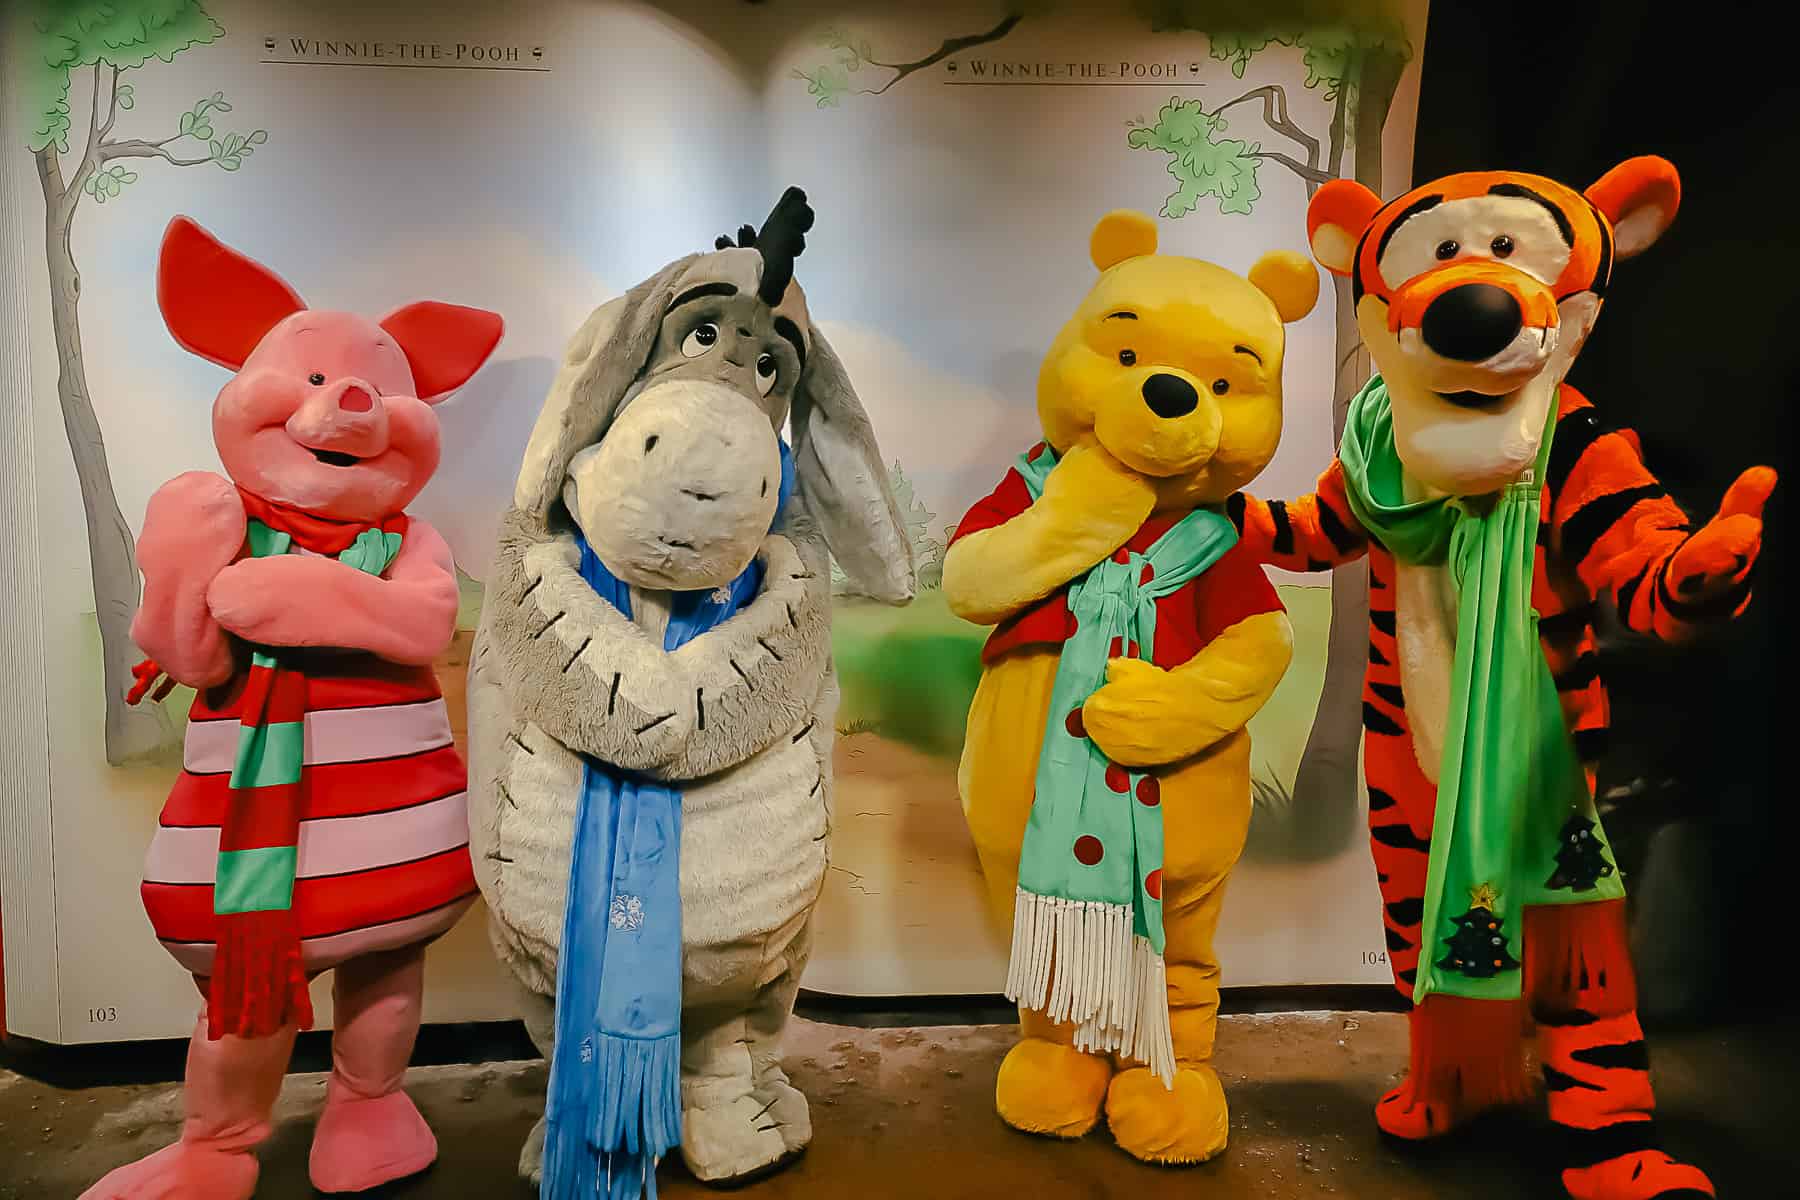 From left to right, Piglet, Eeyore, Winnie the Pooh, Tigger